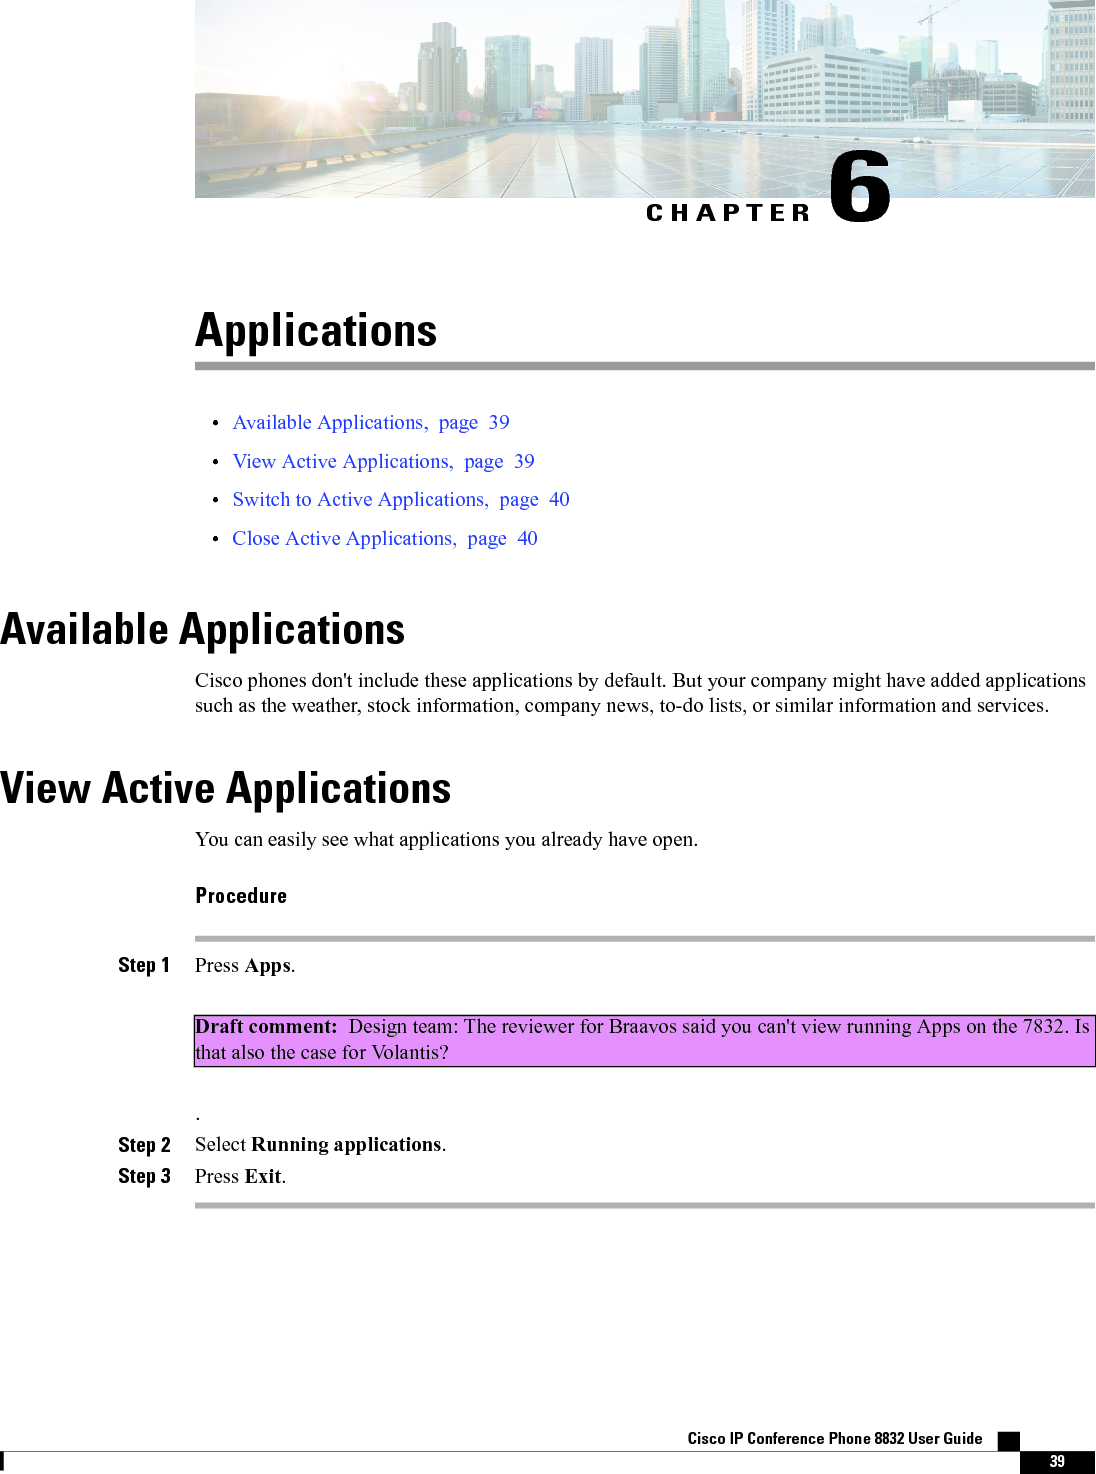 CHAPTER 6Applications•Available Applications, page 39•View Active Applications, page 39•Switch to Active Applications, page 40•Close Active Applications, page 40Available ApplicationsCisco phones don&apos;t include these applications by default. But your company might have added applicationssuch as the weather, stock information, company news, to-do lists, or similar information and services.View Active ApplicationsYou can easily see what applications you already have open.ProcedureStep 1 Press Apps.Draft comment: Design team: The reviewer for Braavos said you can&apos;t view running Apps on the 7832. Isthat also the case for Volantis?.Step 2 Select Running applications.Step 3 Press Exit.Cisco IP Conference Phone 8832 User Guide    39